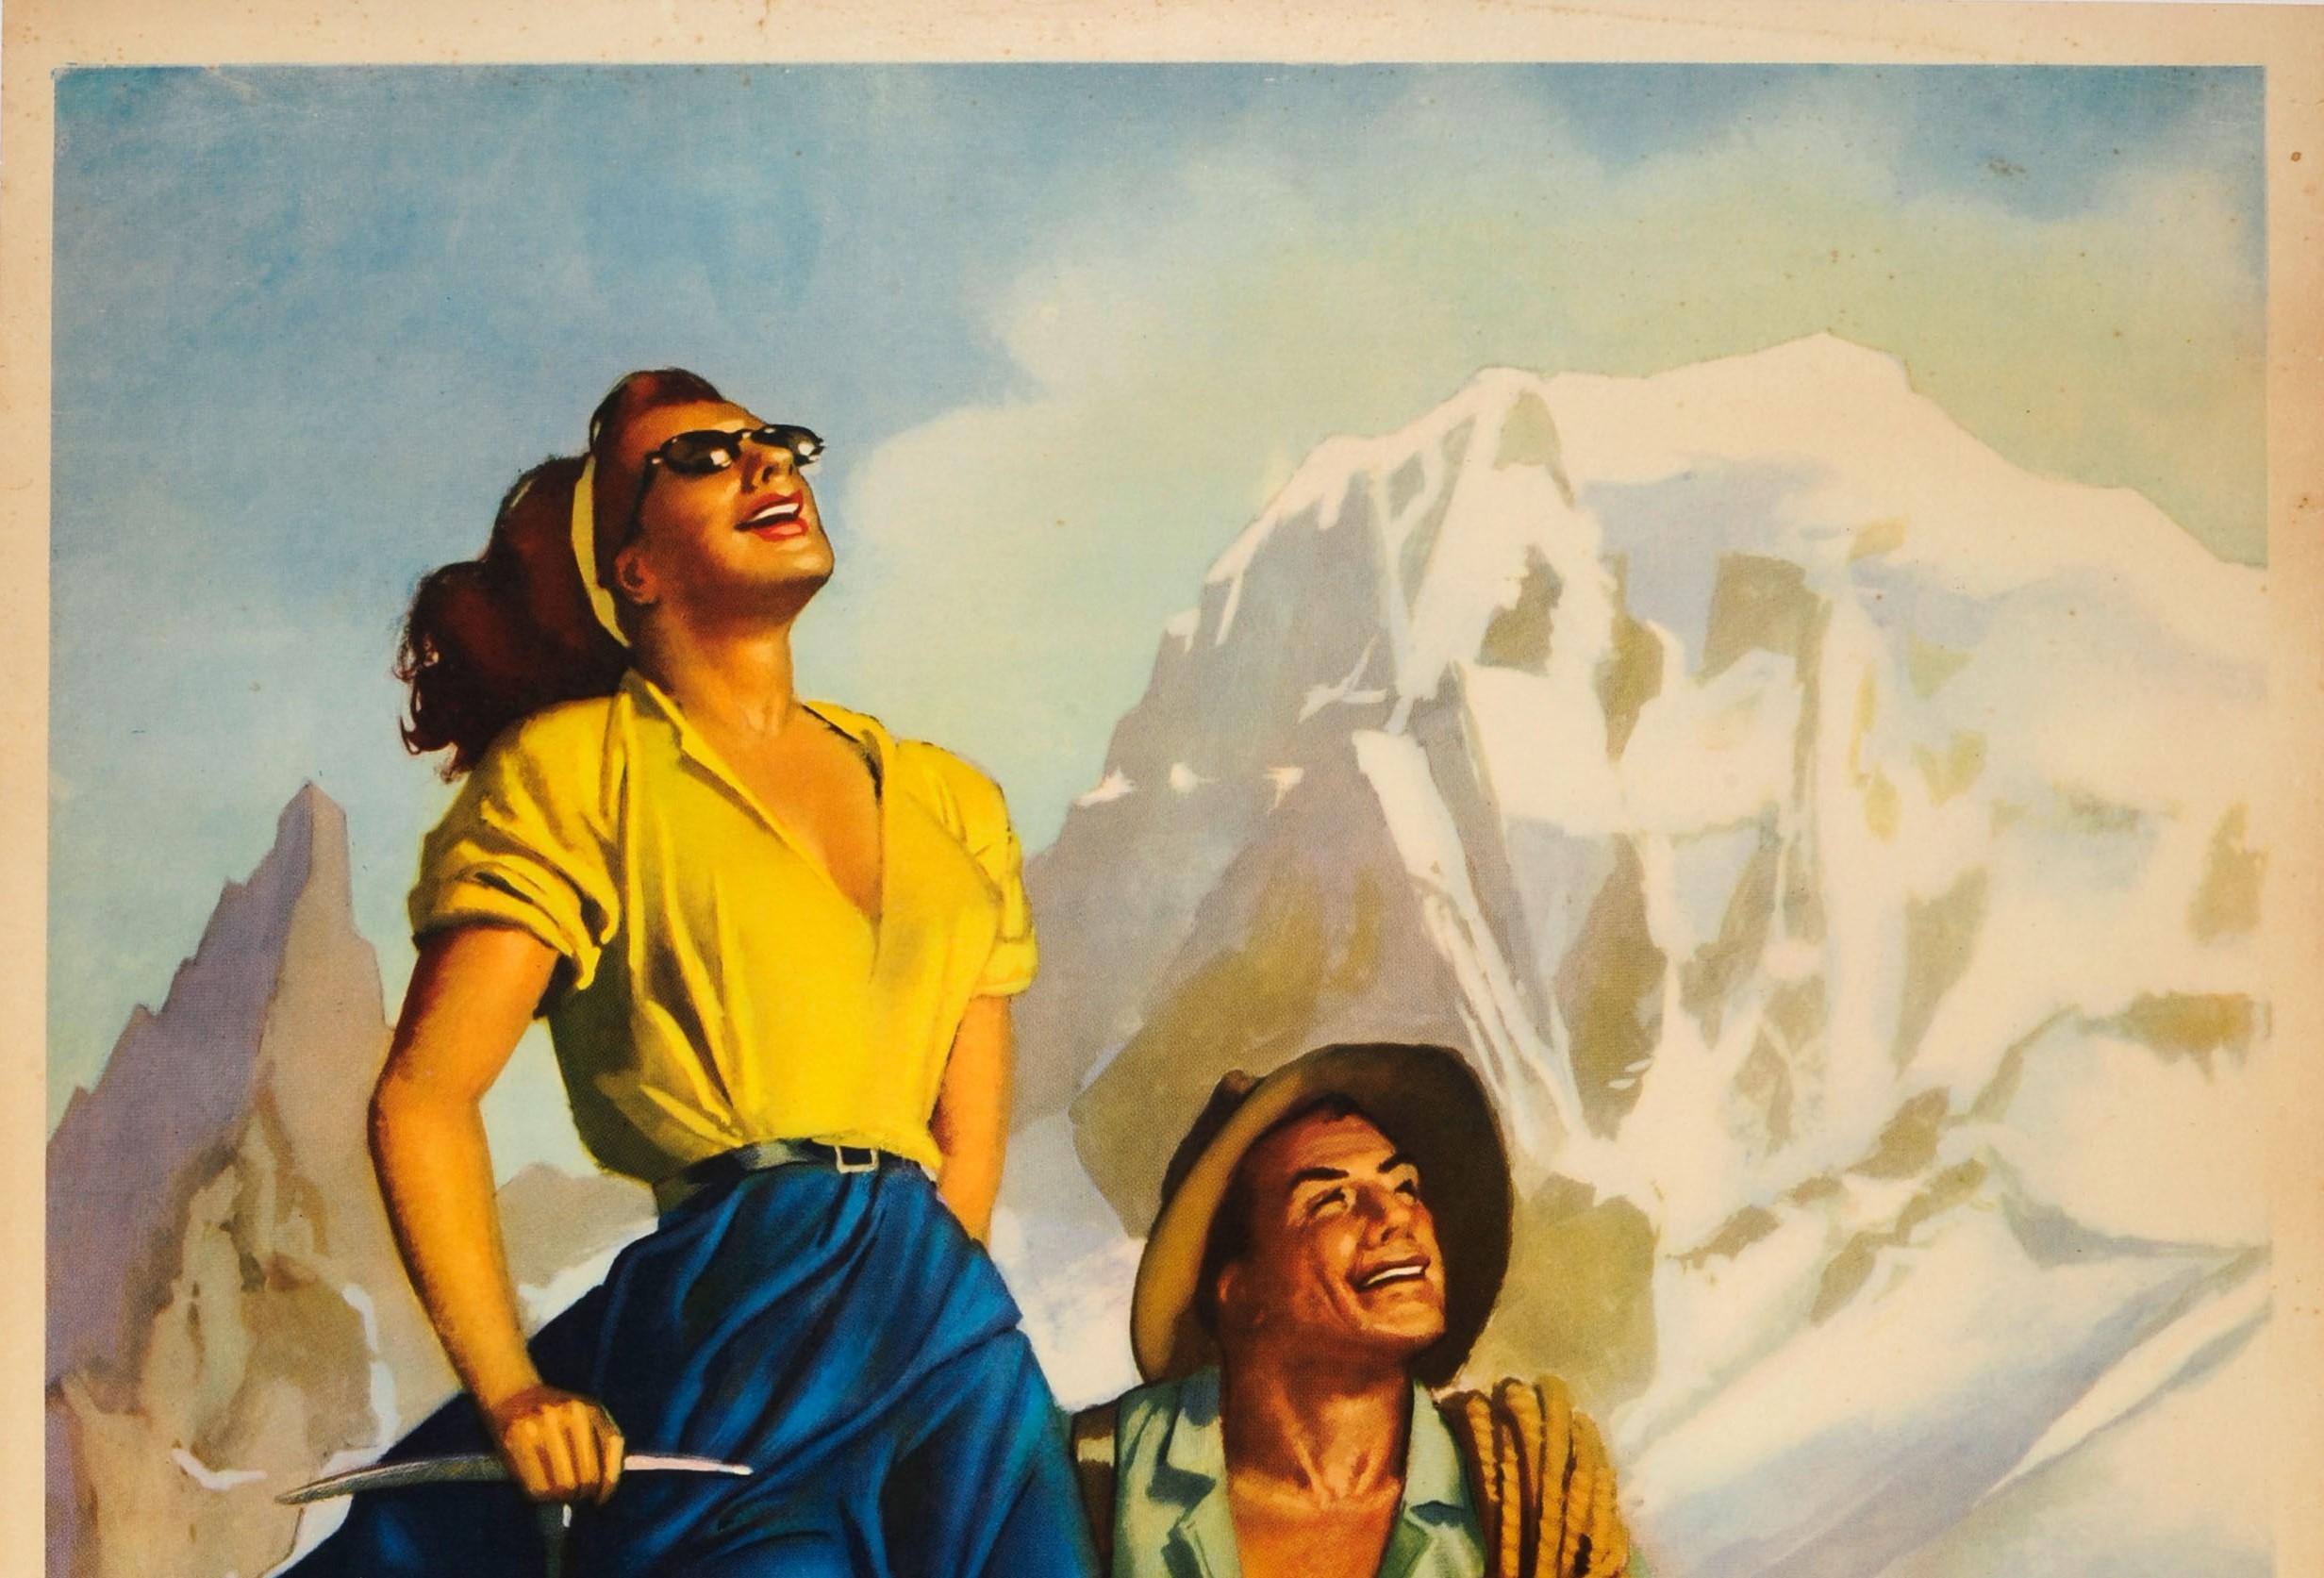 Original Vintage Travel Poster Ft Hiking In The Aosta Valley Alps Vallee D'Aoste - Print by Gino Boccasile